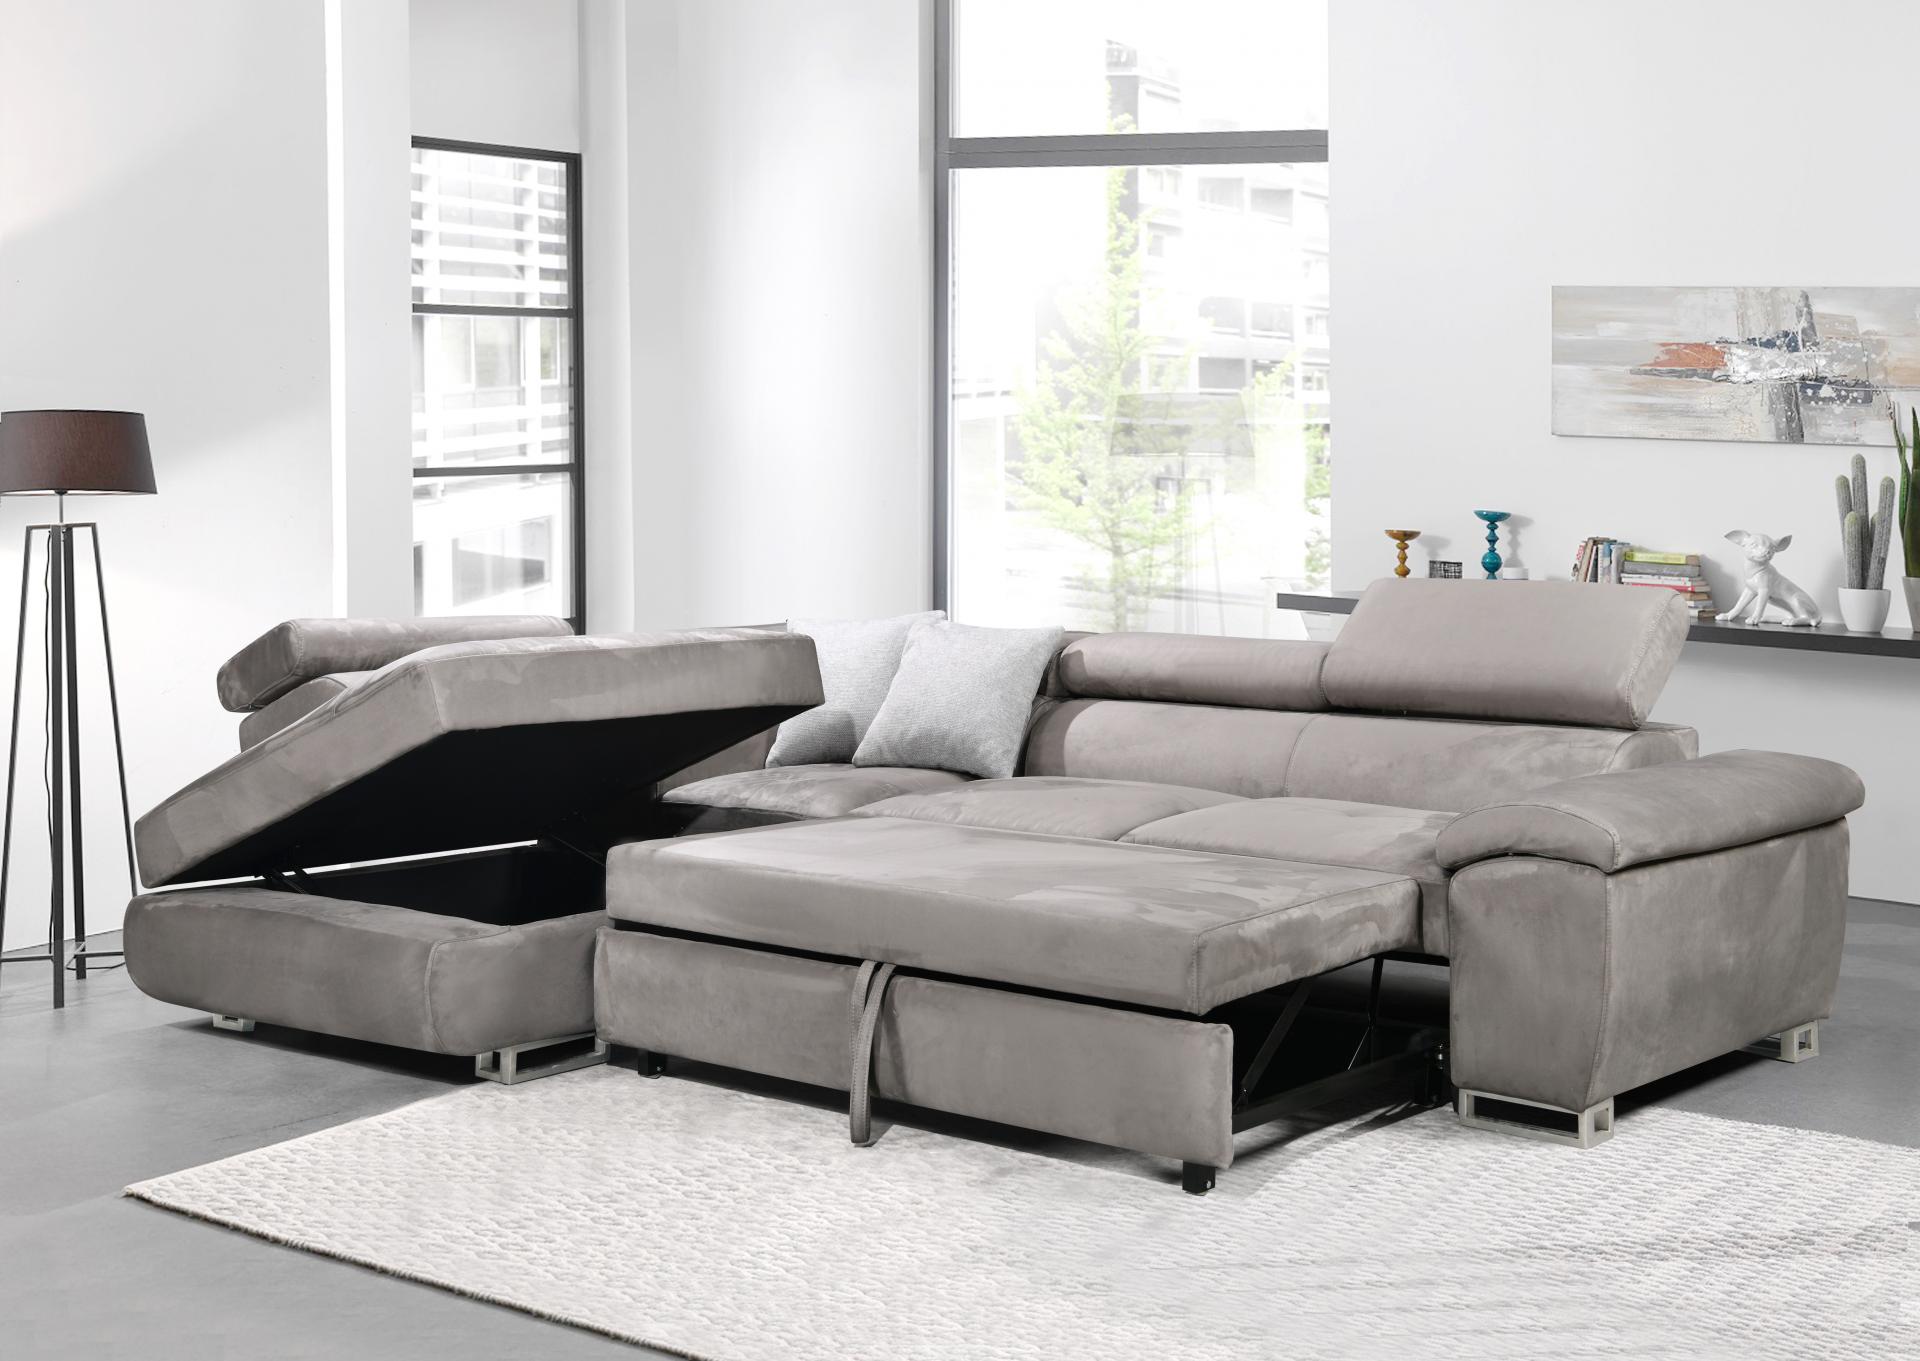 Madrid 3 pc Sofabed Light Grey Sectional with Left storage Chase,Sofacraft